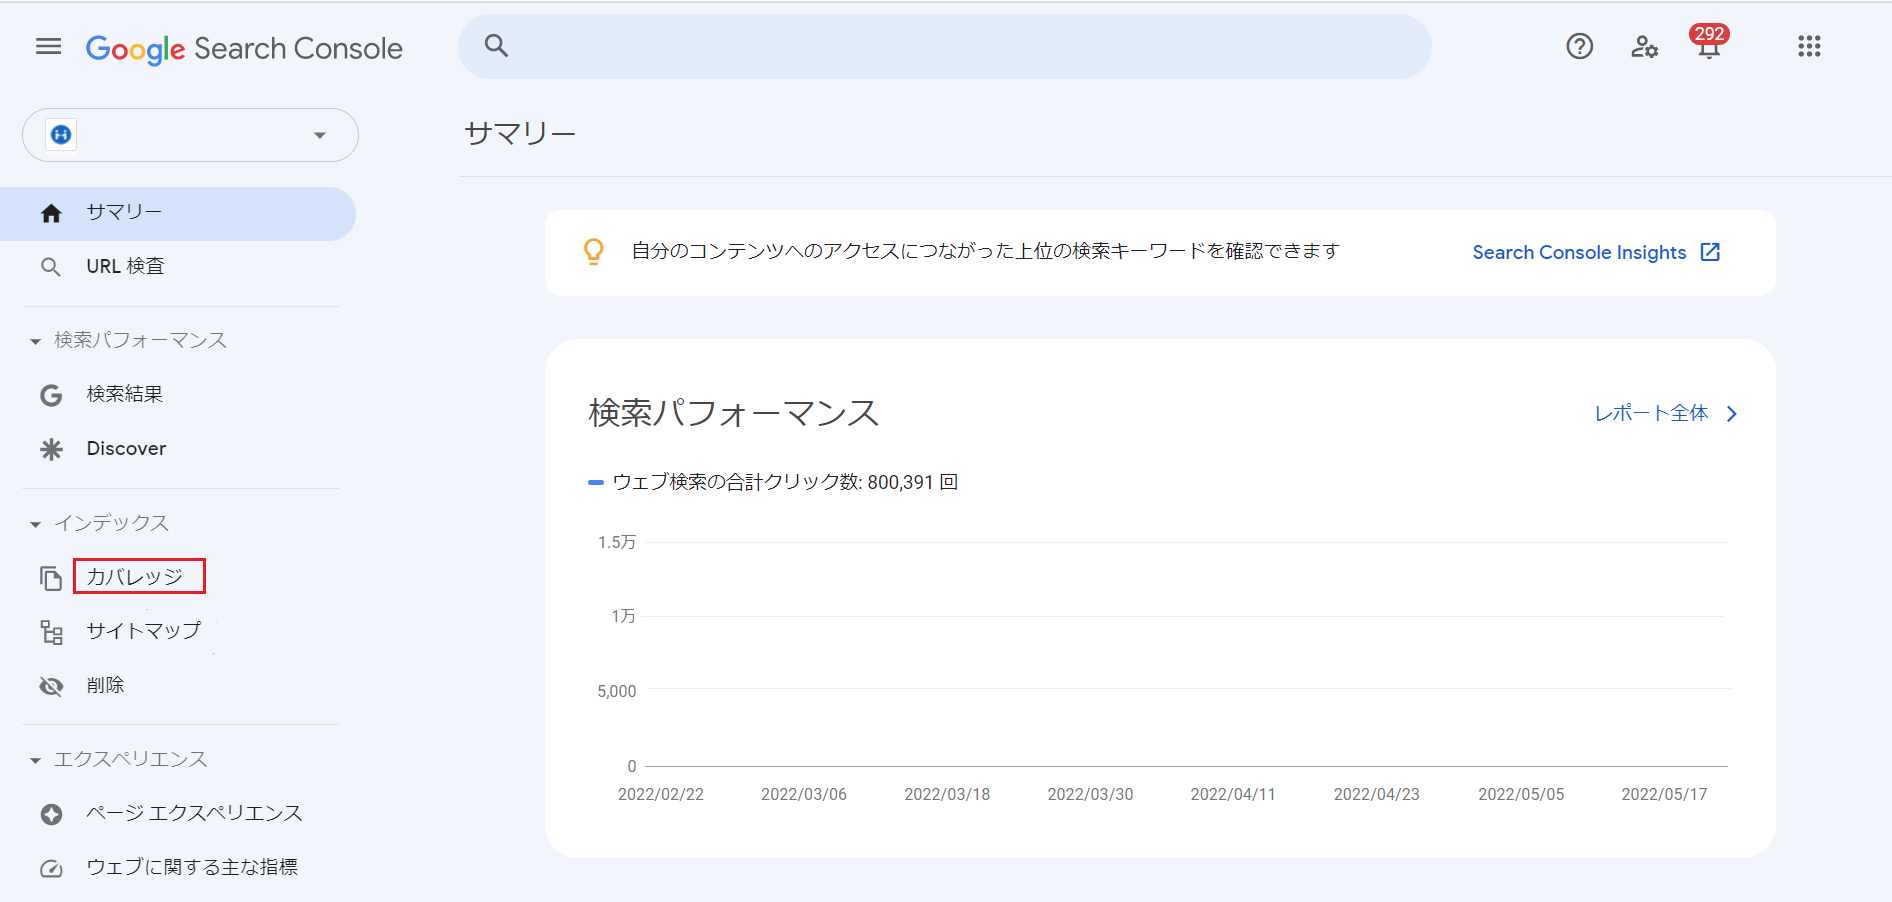 Search Console　画面左の「カバレッジ」をクリック